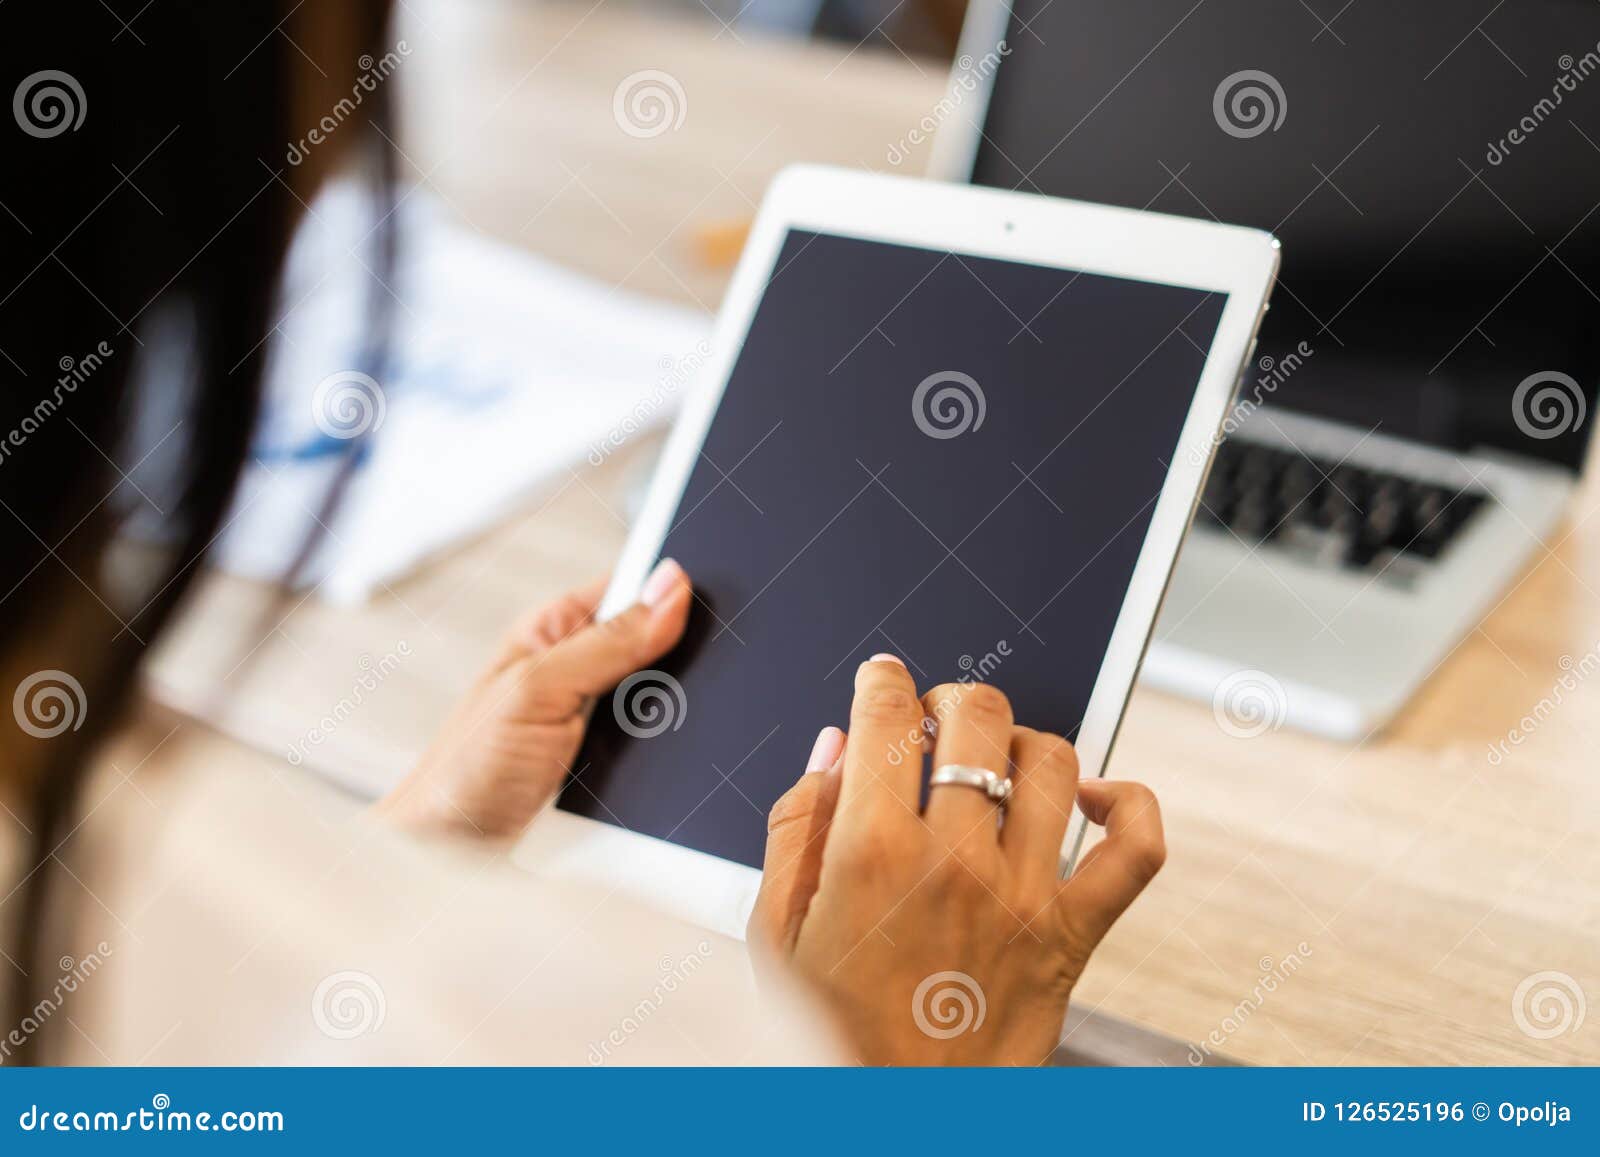 lifestyle with modern woman using tablet or ipad with hand holding touchscreen. hands of working woman with smart tablet